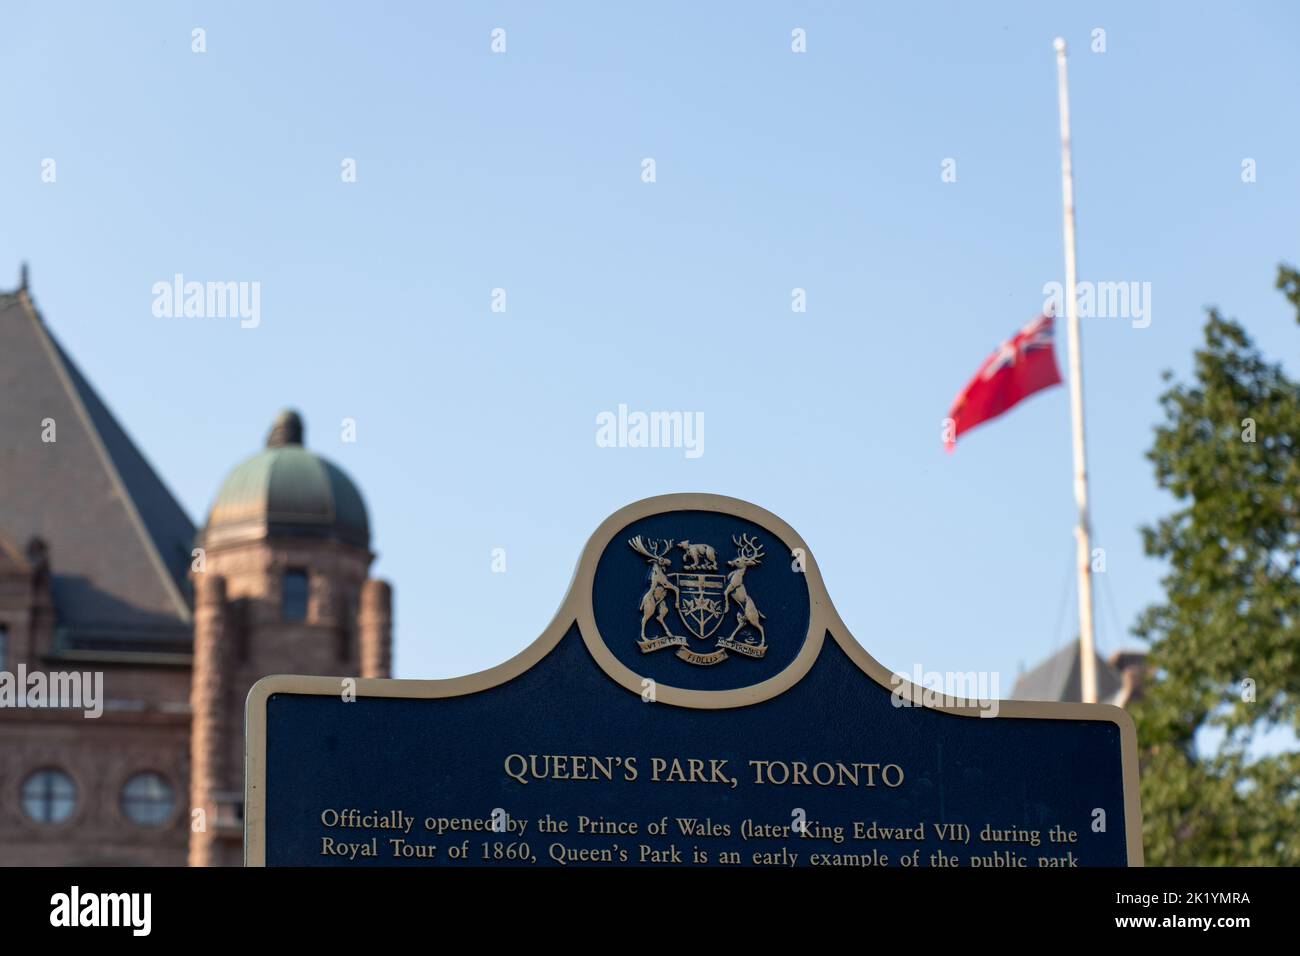 A sign marking Queens Park, the home to the Legislative Assembly of Ontario; seen with the Ontario flag at half staff after death Queen Elizabeth II. Stock Photo